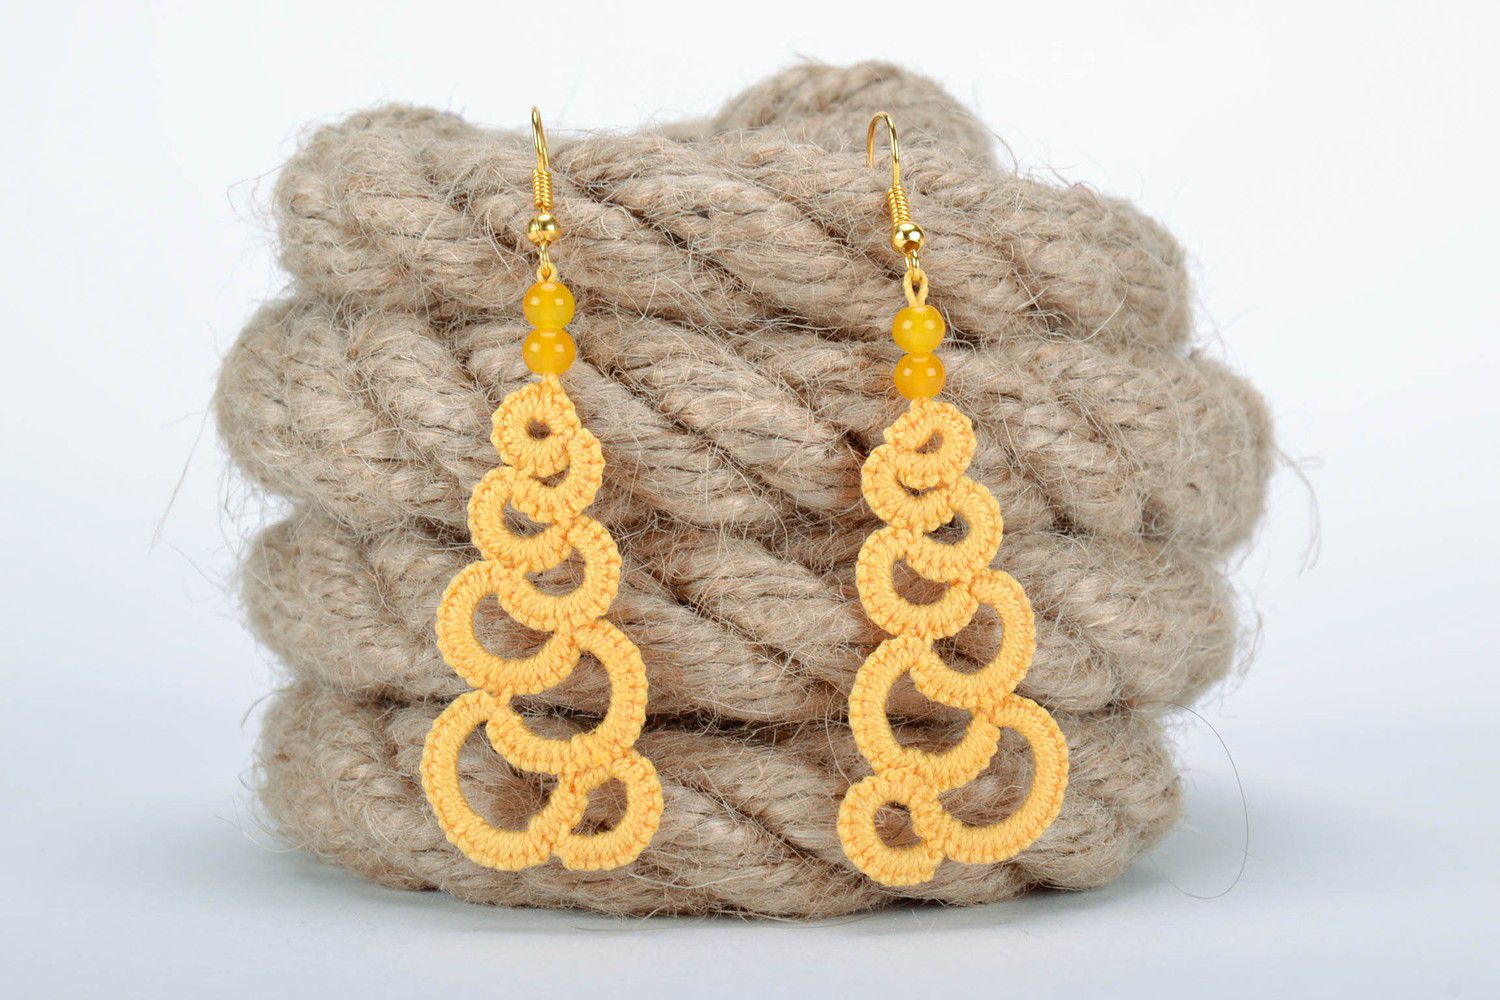 Orange earrings made from woven lace photo 1